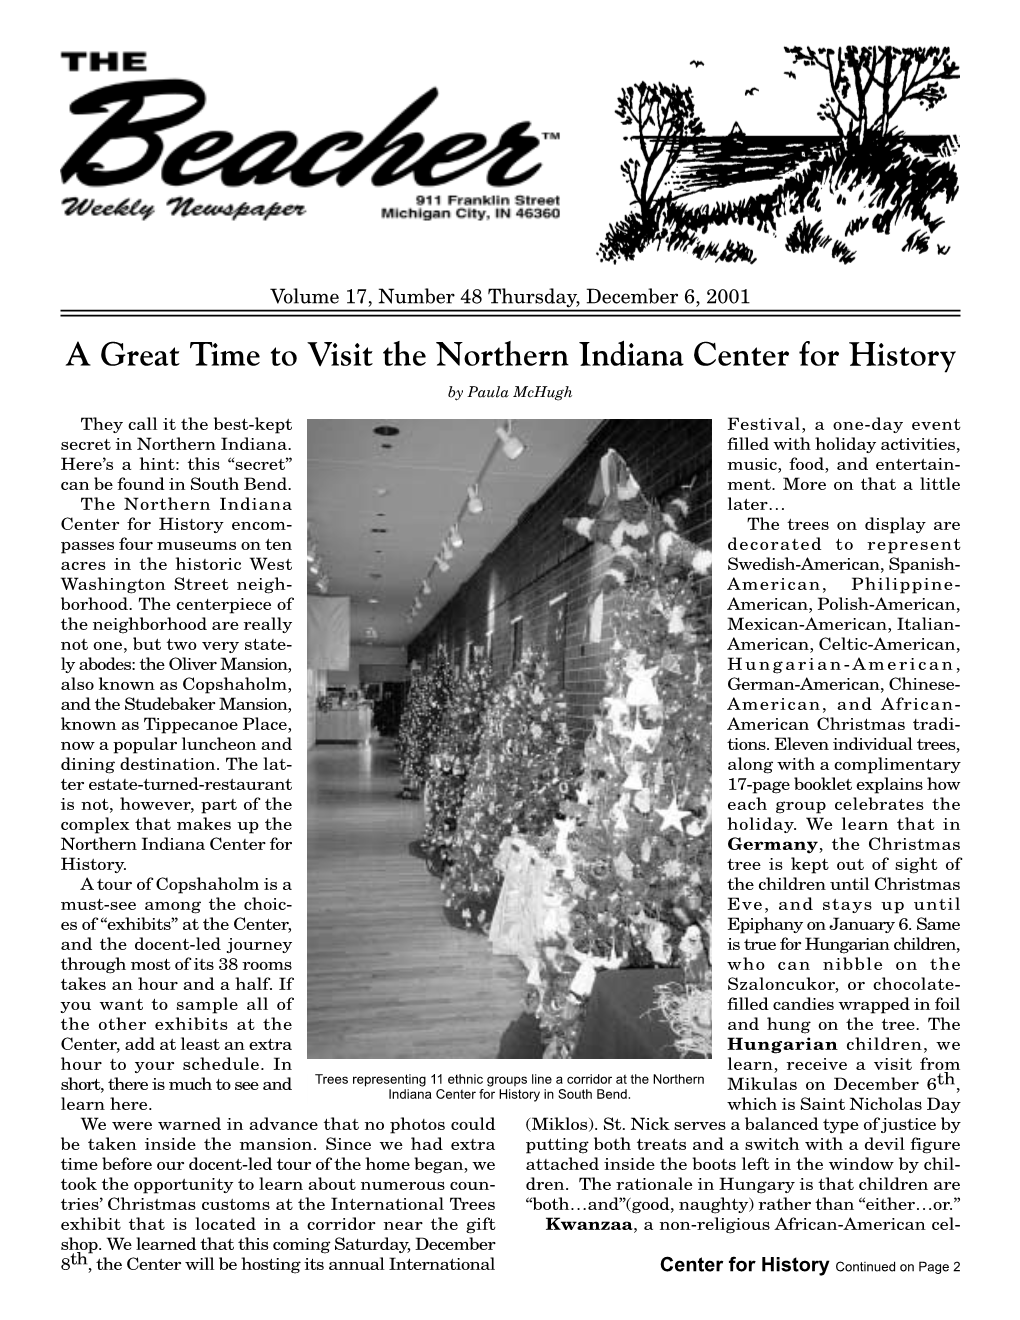 A Great Time to Visit the Northern Indiana Center for History by Paula Mchugh They Call It the Best-Kept Festival, a One-Day Event Secret in Northern Indiana